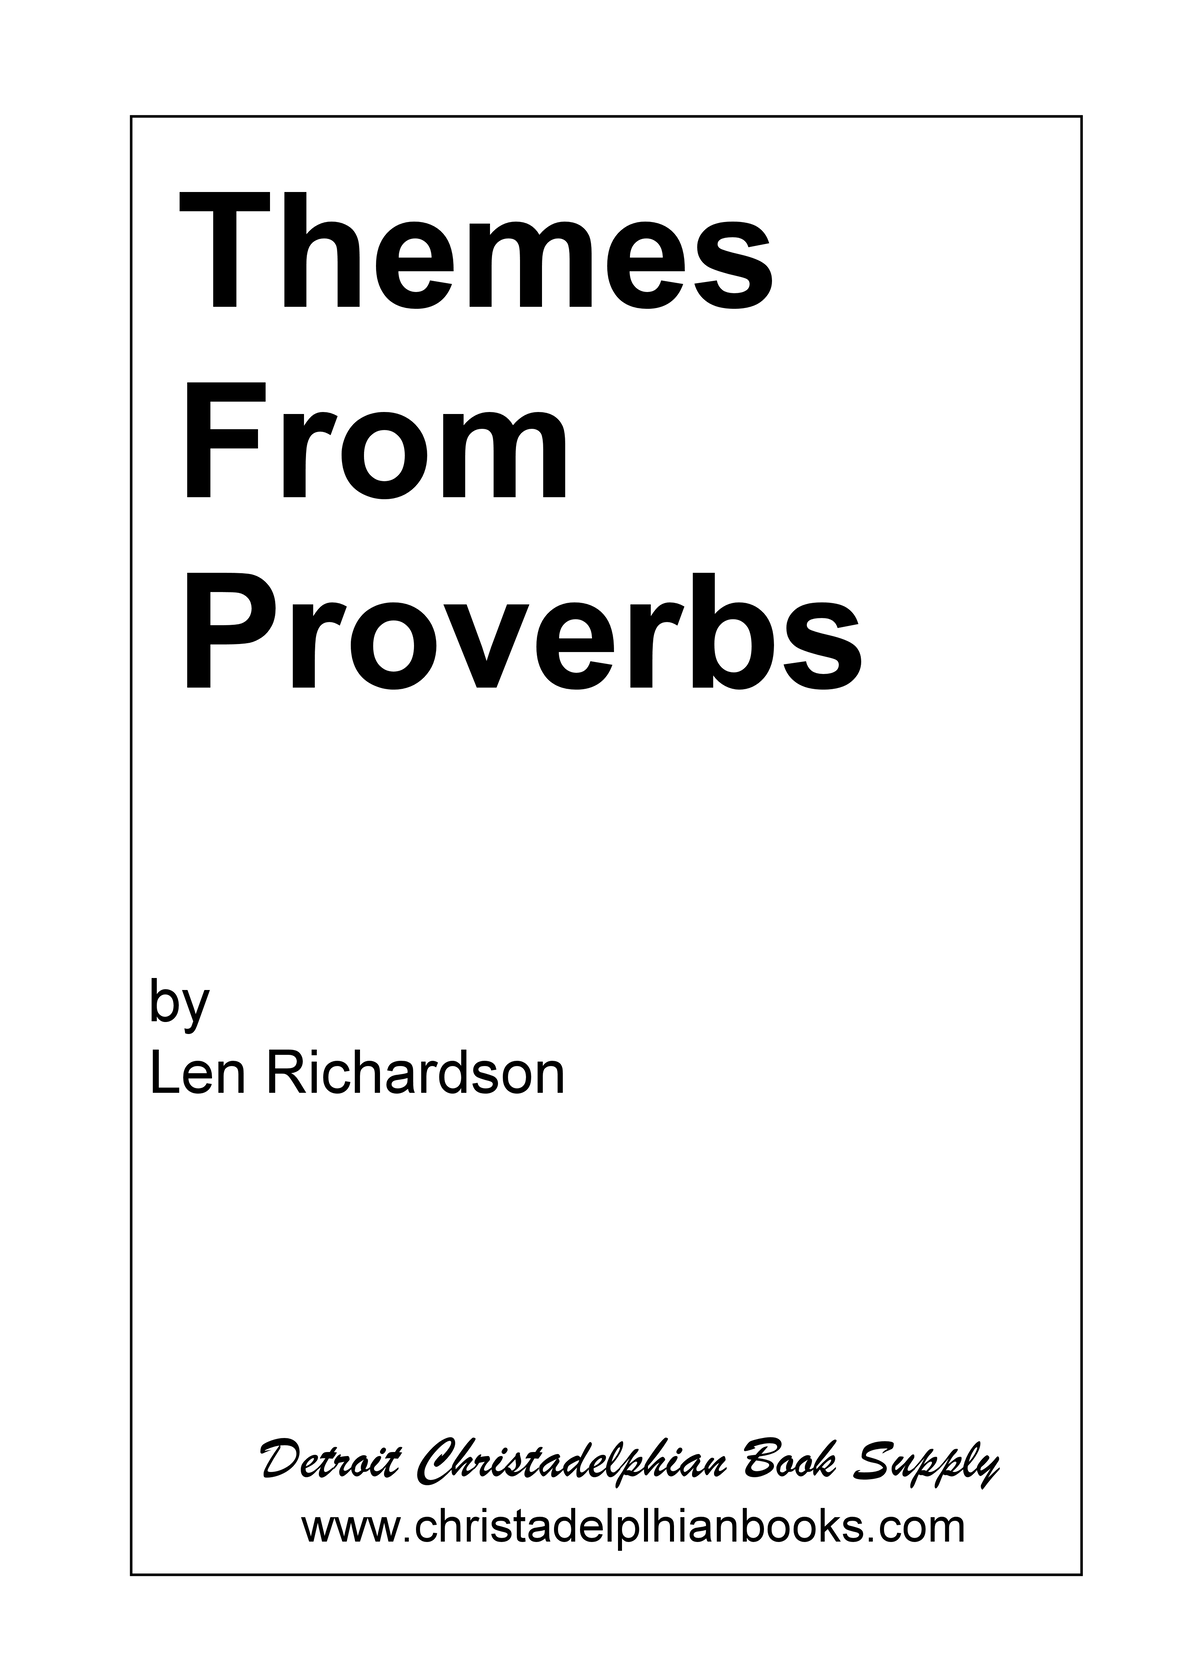 Themes from Proverbs  -  pdf only